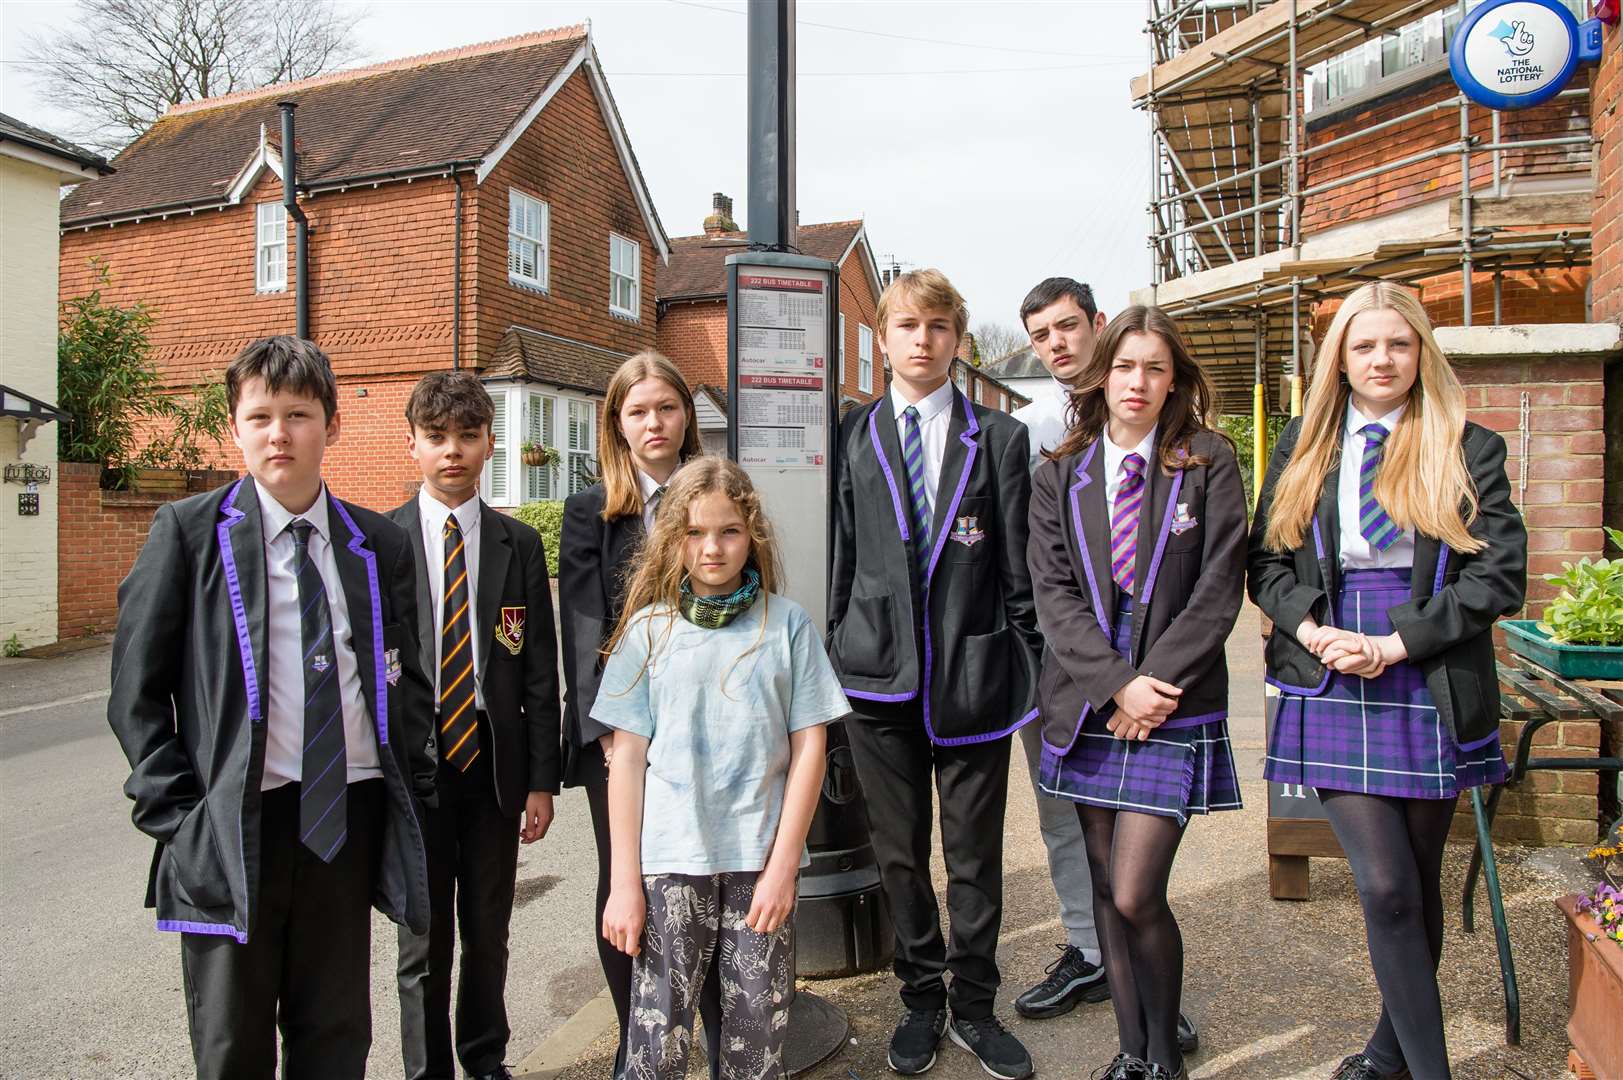 Students from Knole Academy in Plaxtol affected by the S4 bus route cut proposed by KCC